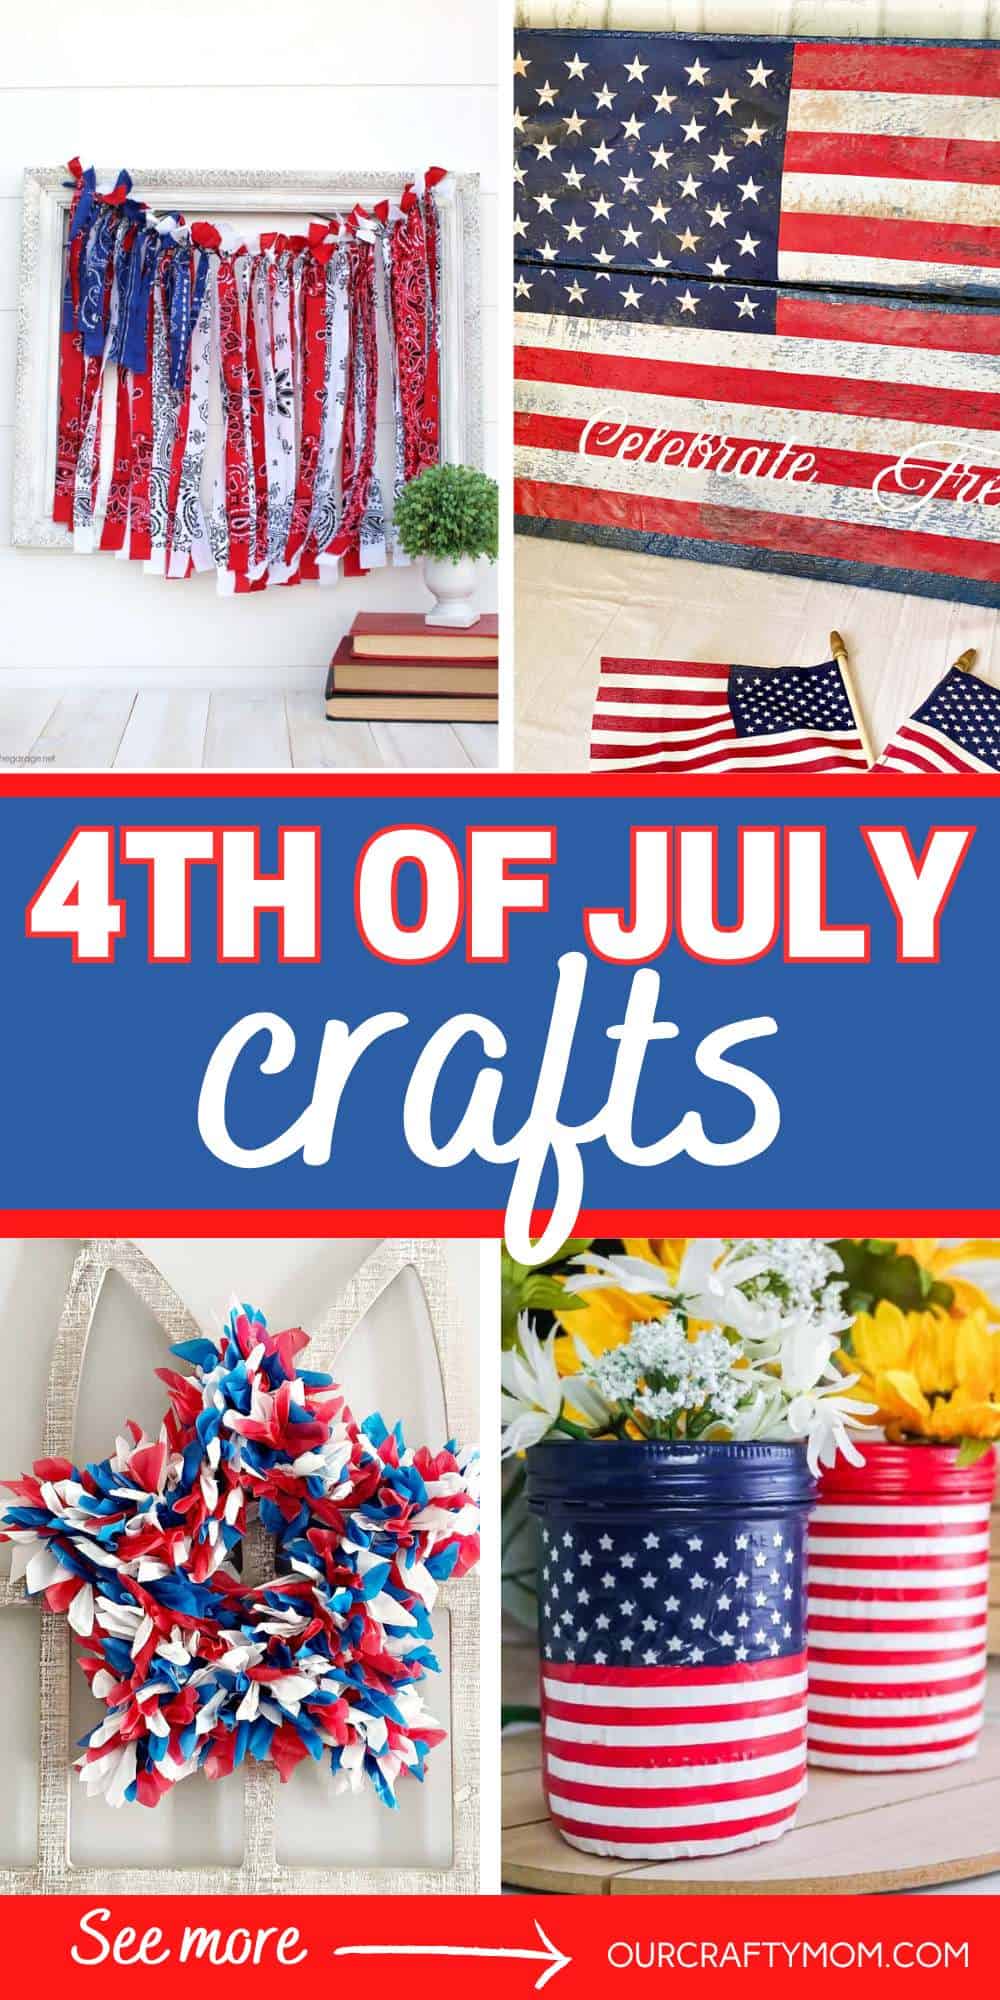 4th of july crafts pin collage with text